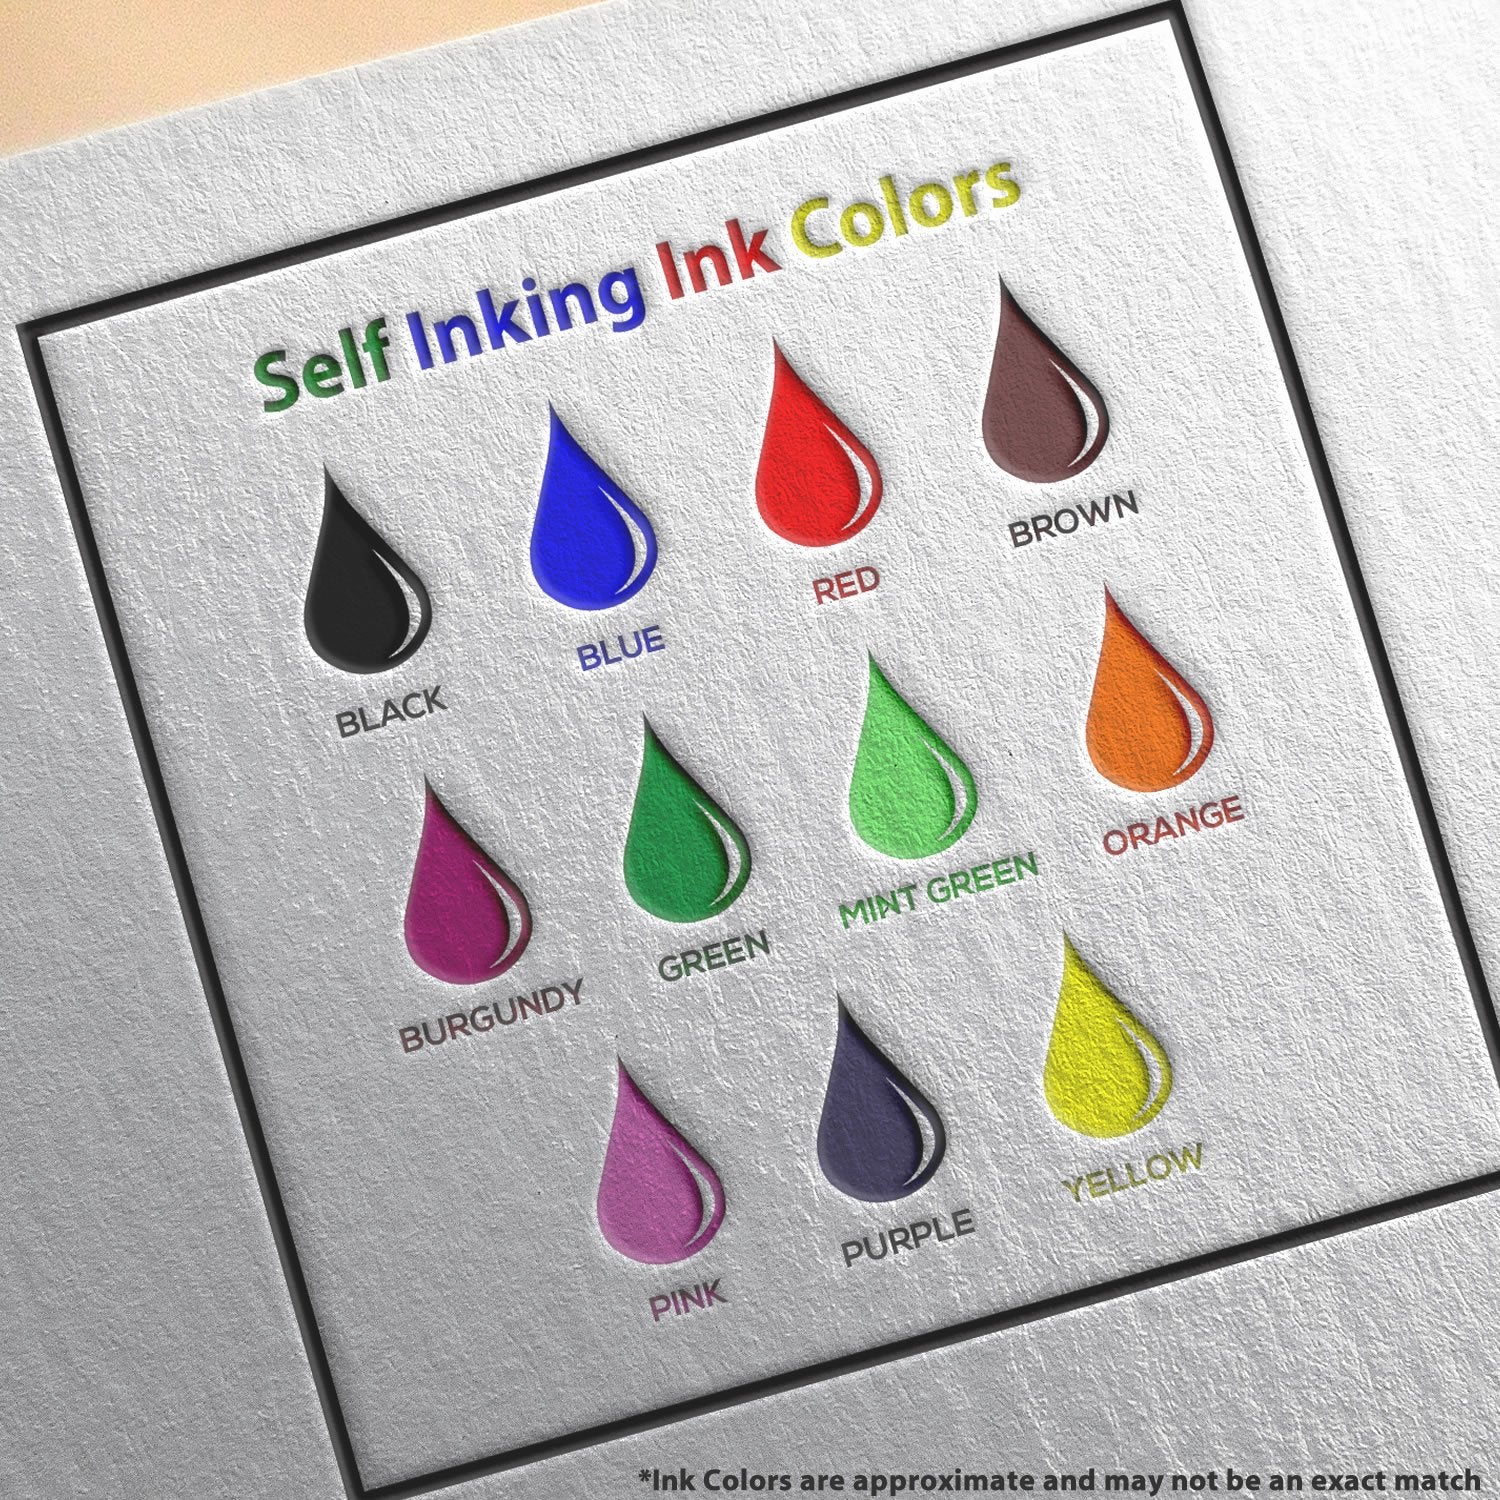 Self Inking No Referral Needed Stamp Ink Color Options